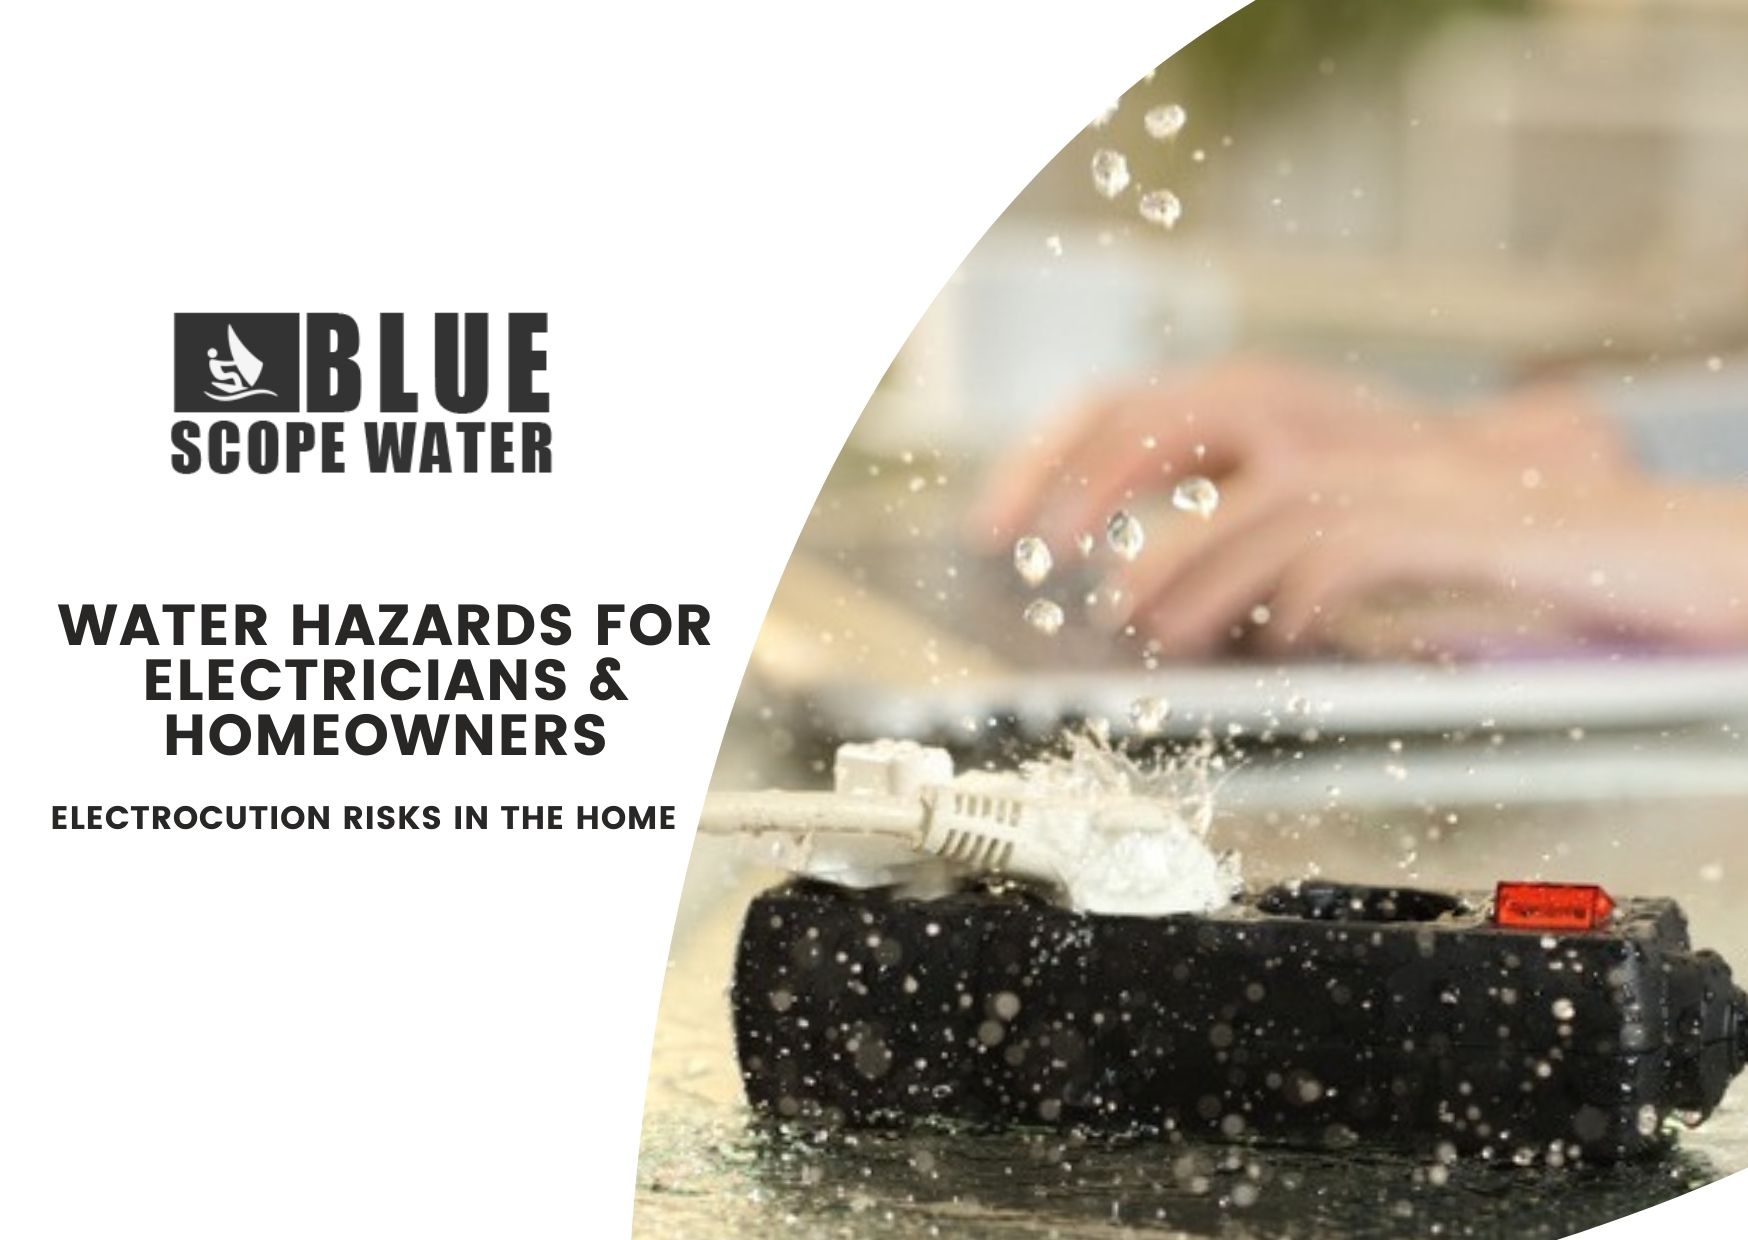 Water Hazards For Electricians & Homeowners: Electrocution Risks In The Home